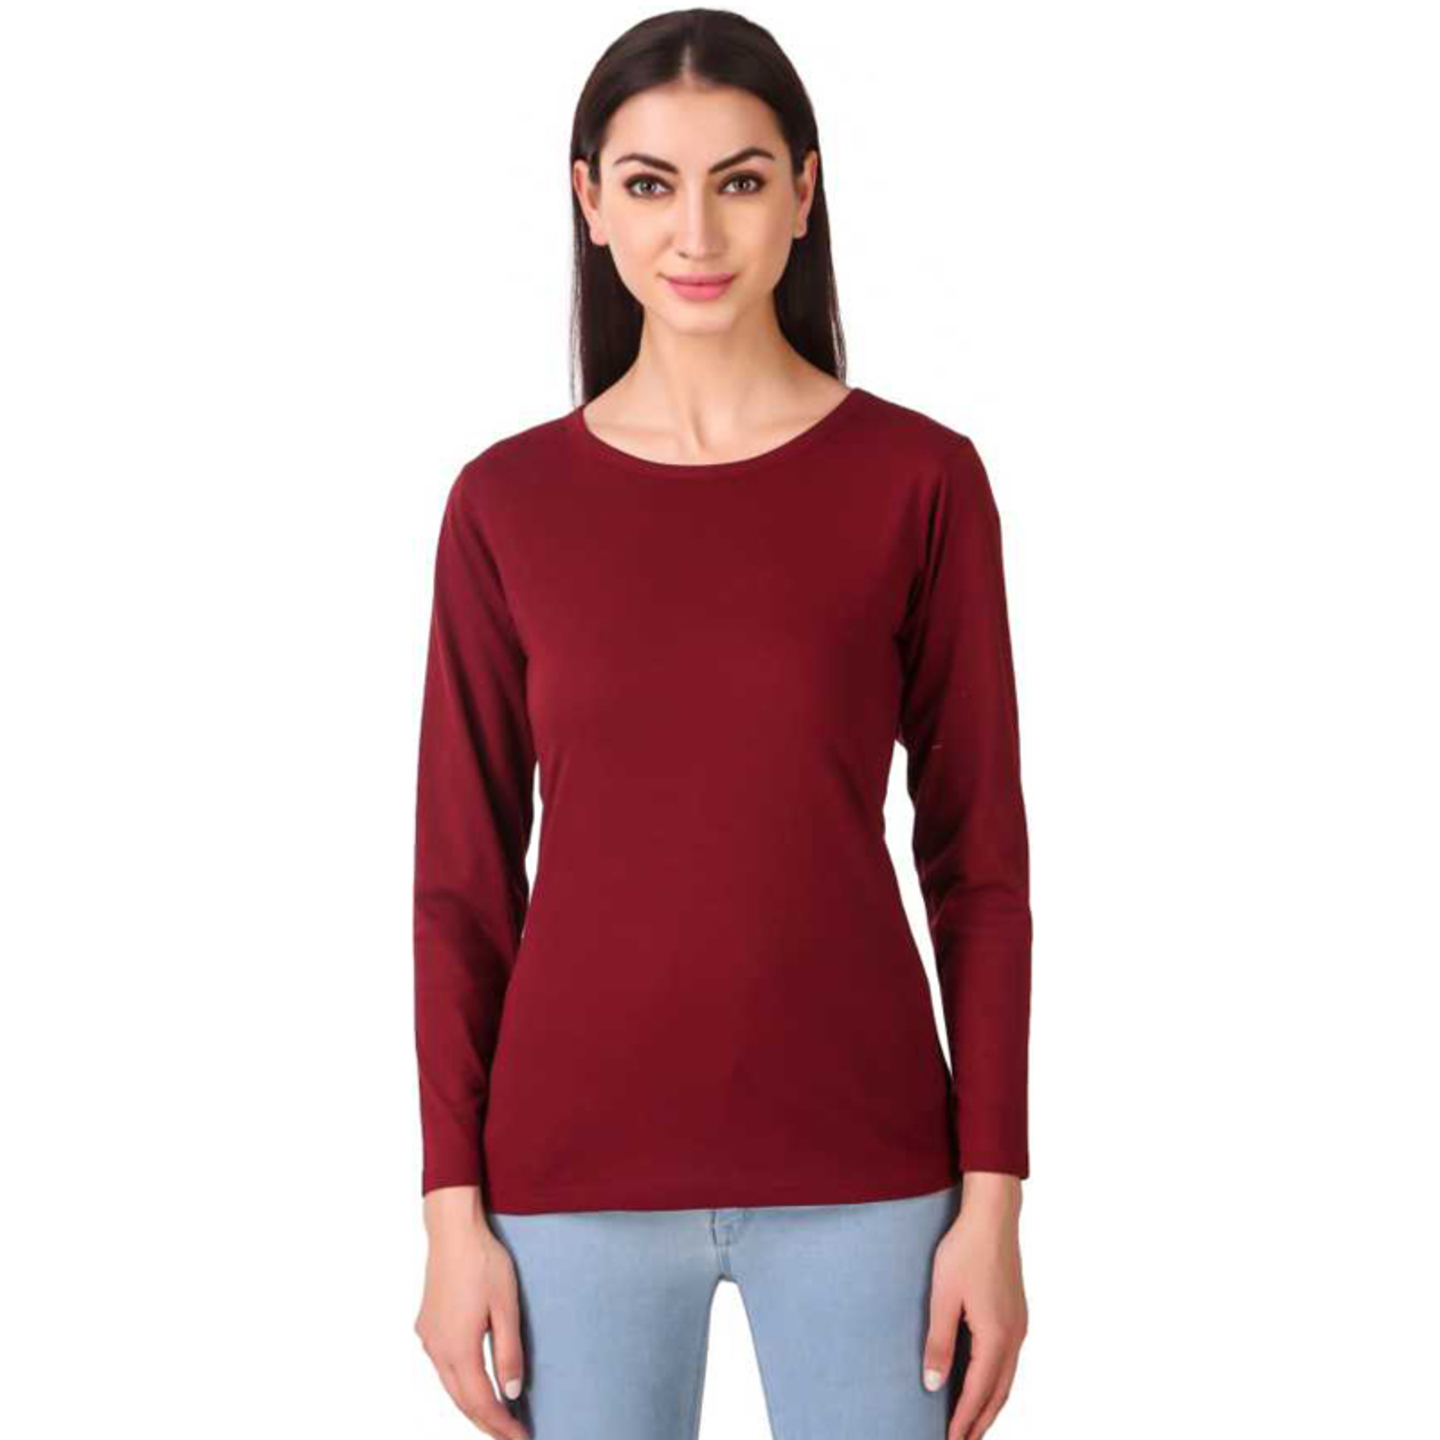 Paretto Maroon Full Sleeves Cotton T-shirt for Women